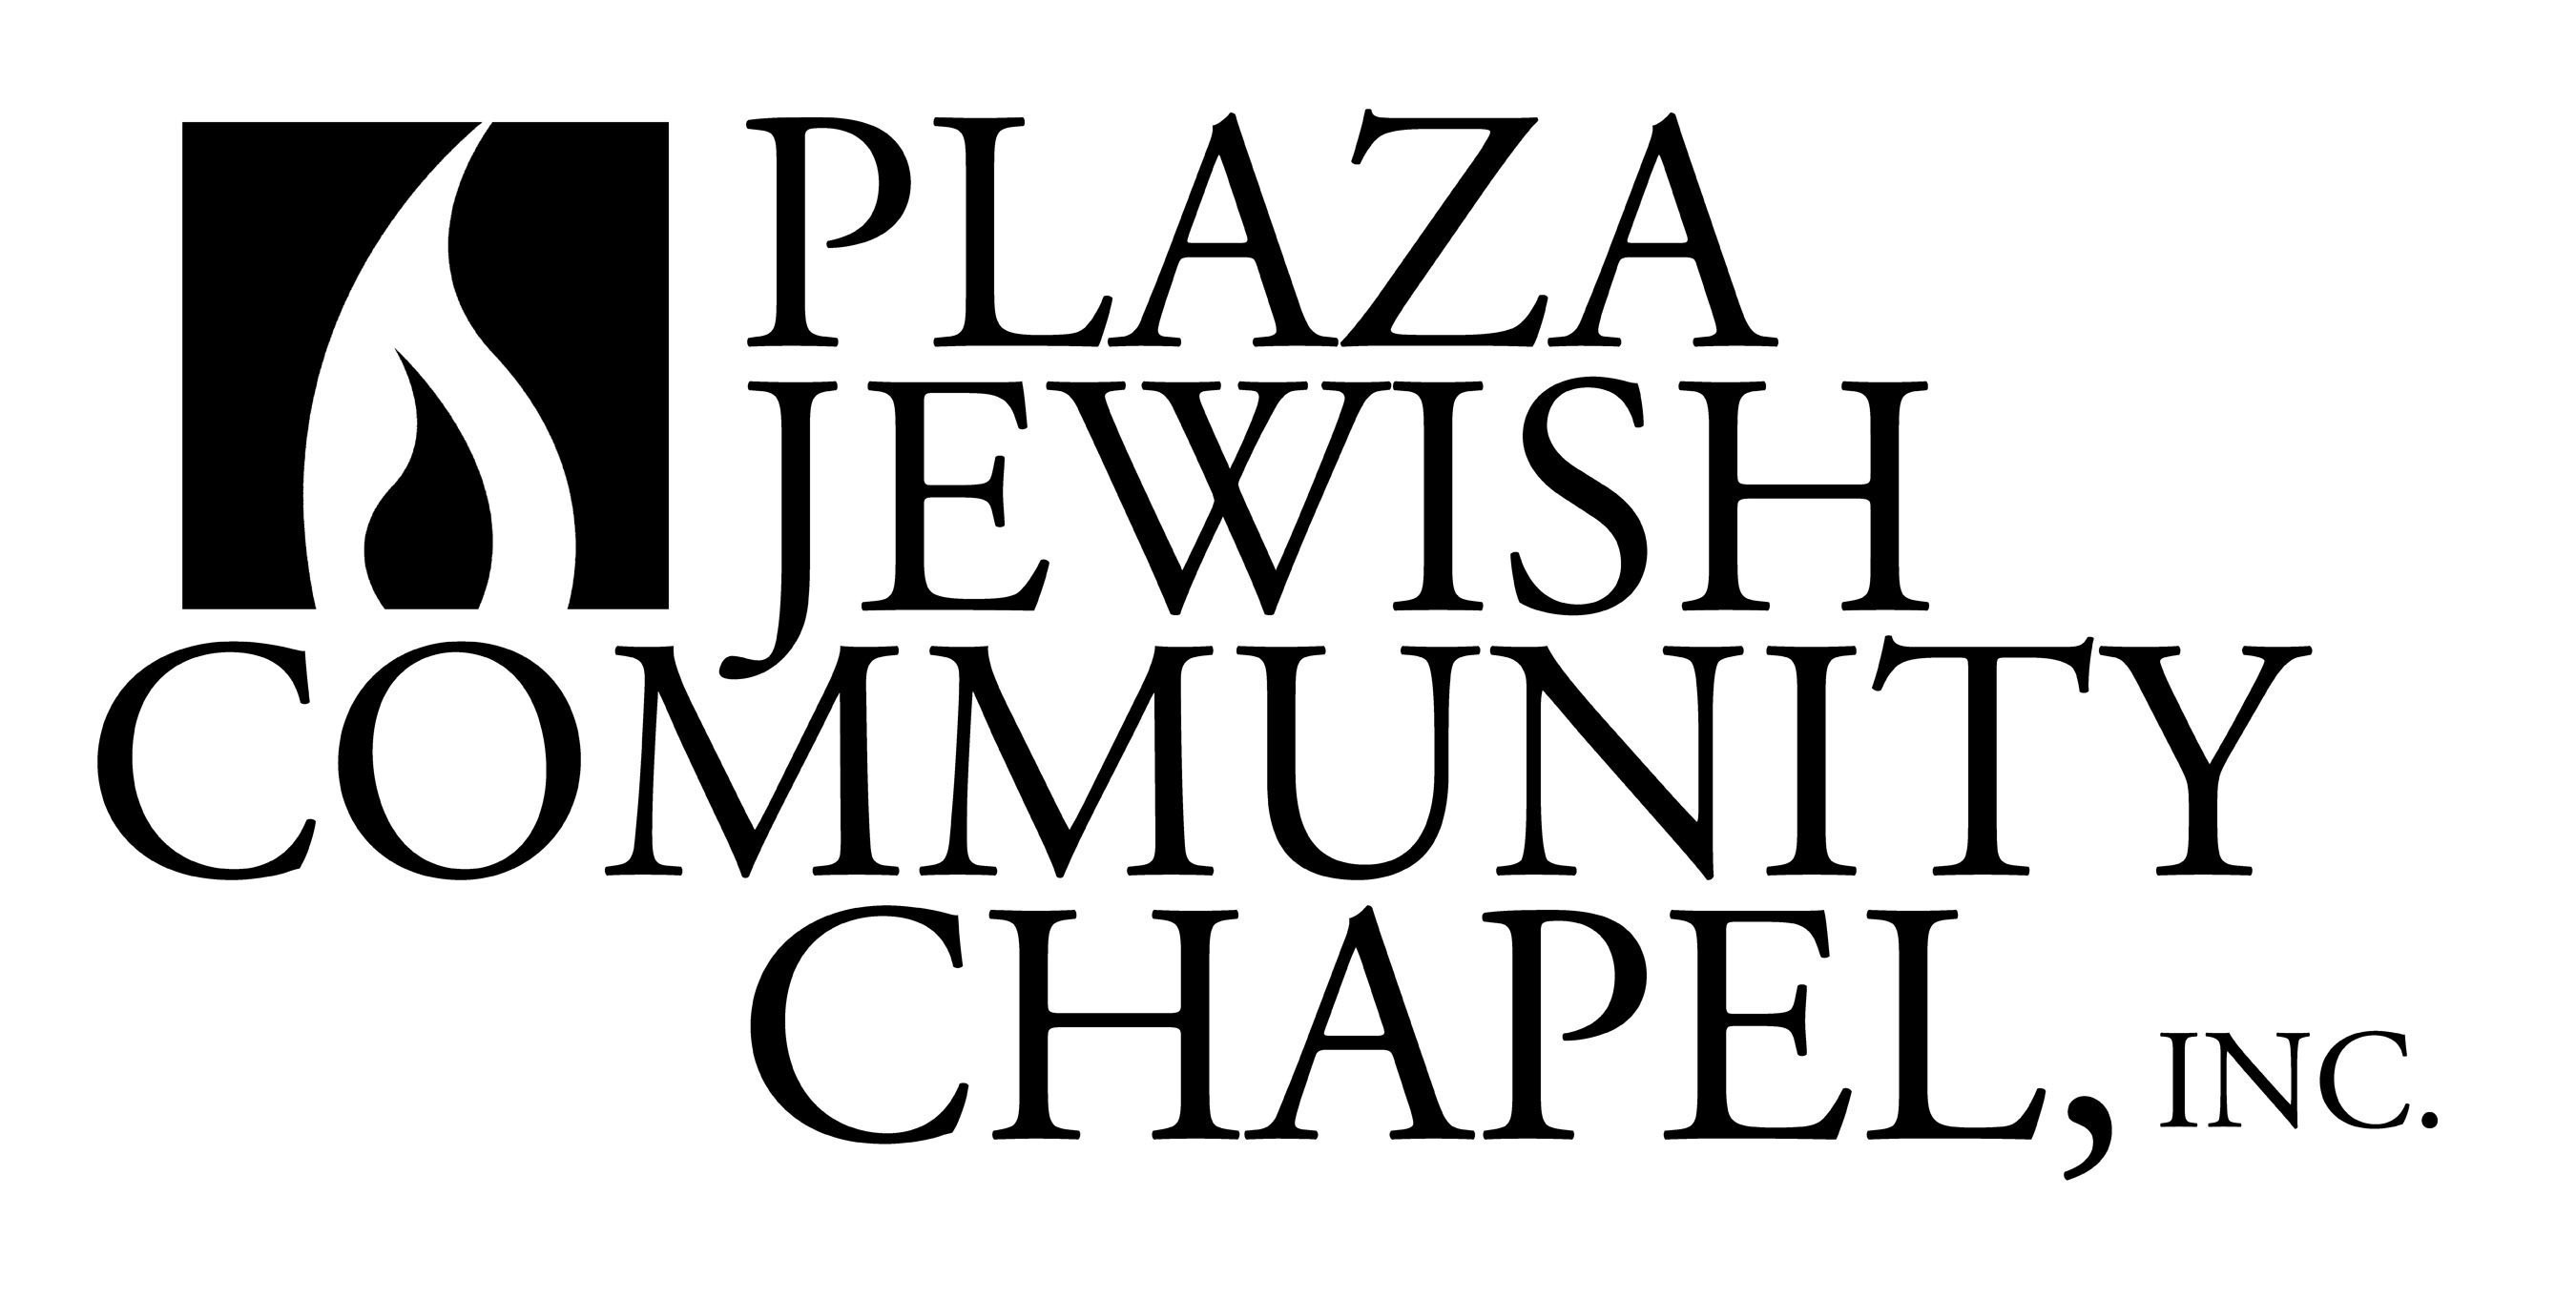 The mission of Plaza Jewish Community Chapel is to ensure that every member of the Jewish Community receives a dignified and respectful Jewish funeral; to lower the high cost of funerals by eliminating the profit motive and commercialism so often associated with the funeral industry; and to provide appropriate connections to Jewish communal resources that the bereaved may need to cope with emotional or practical problems.